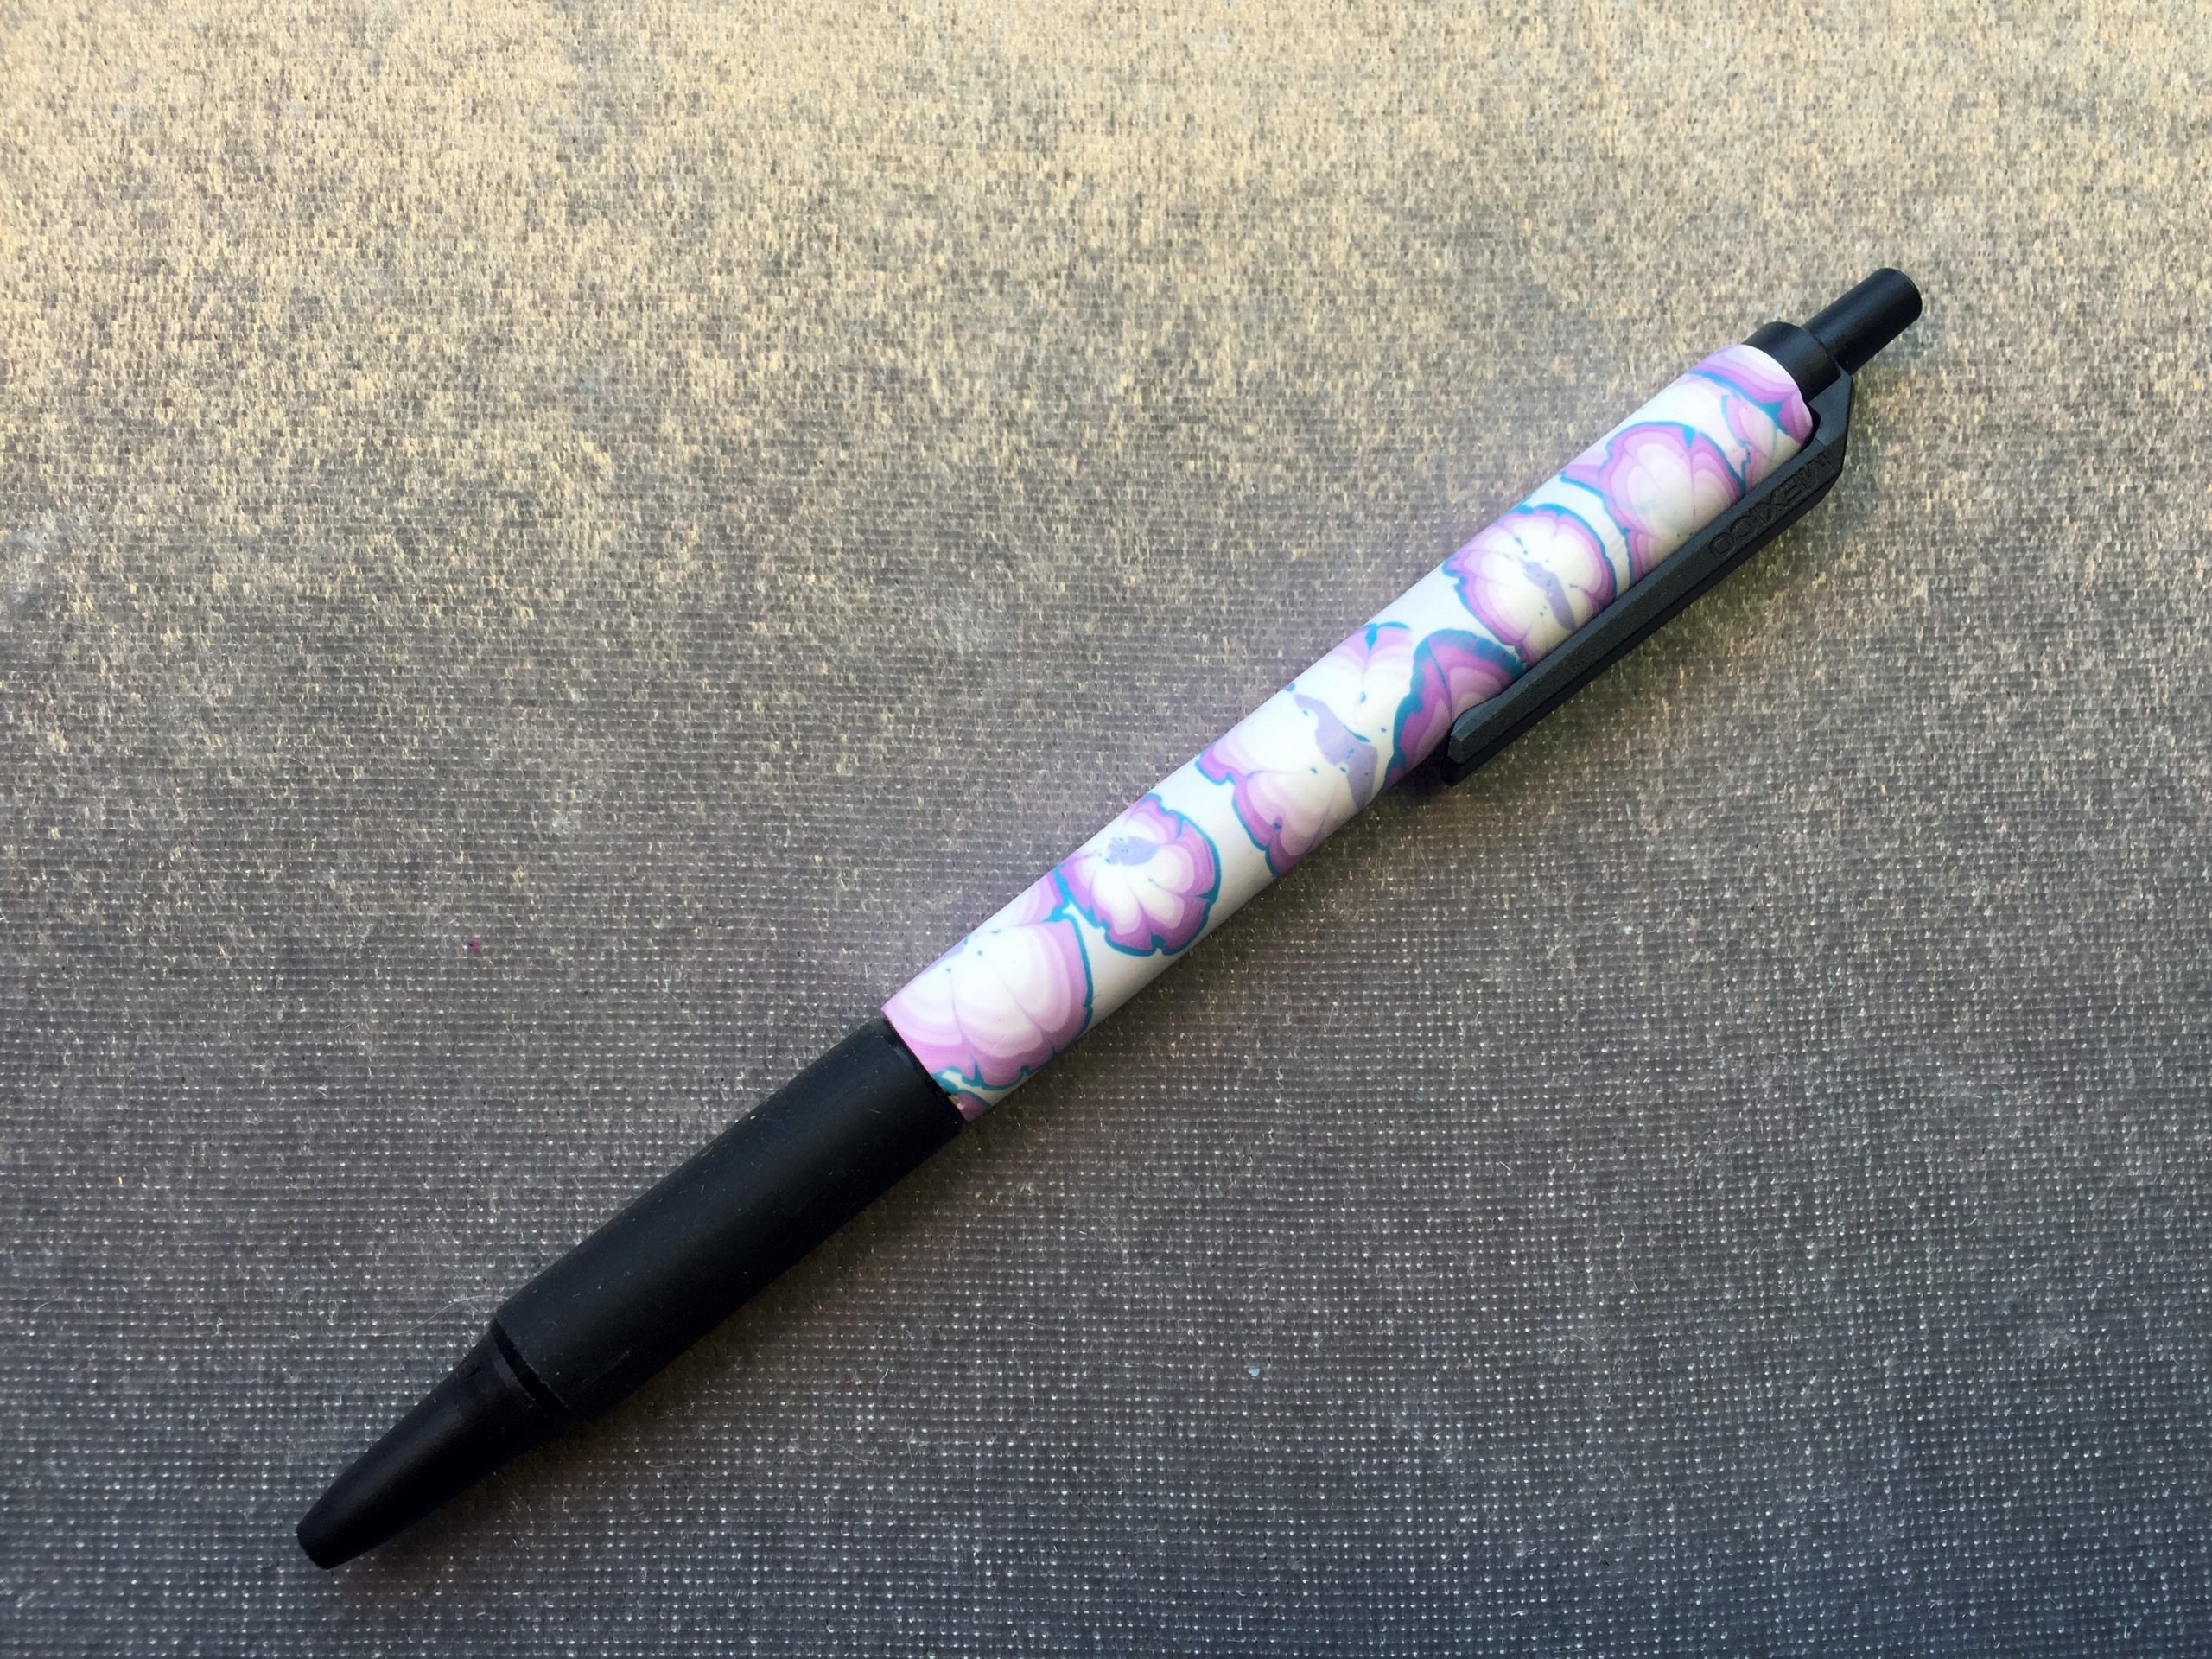 Polymer clay white and lavender zinnia design retractable pen